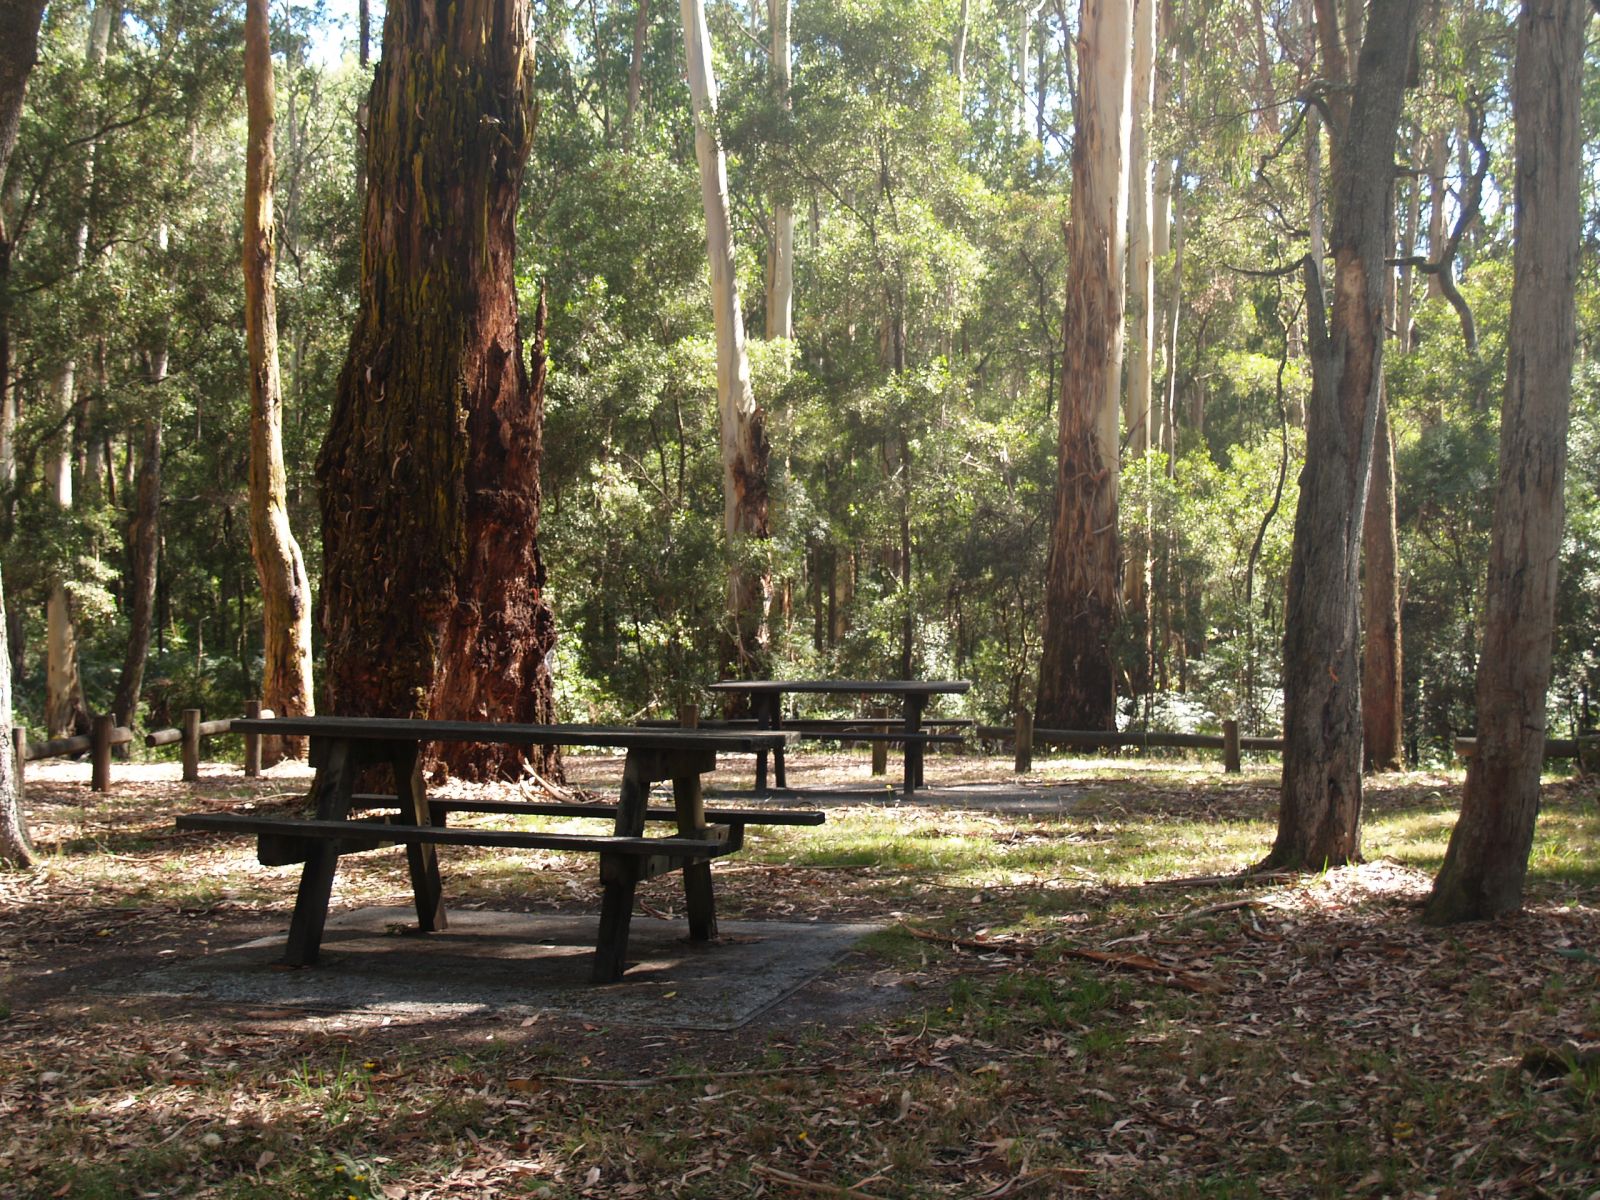 Picnic tables in a grassy area amongst tall trees